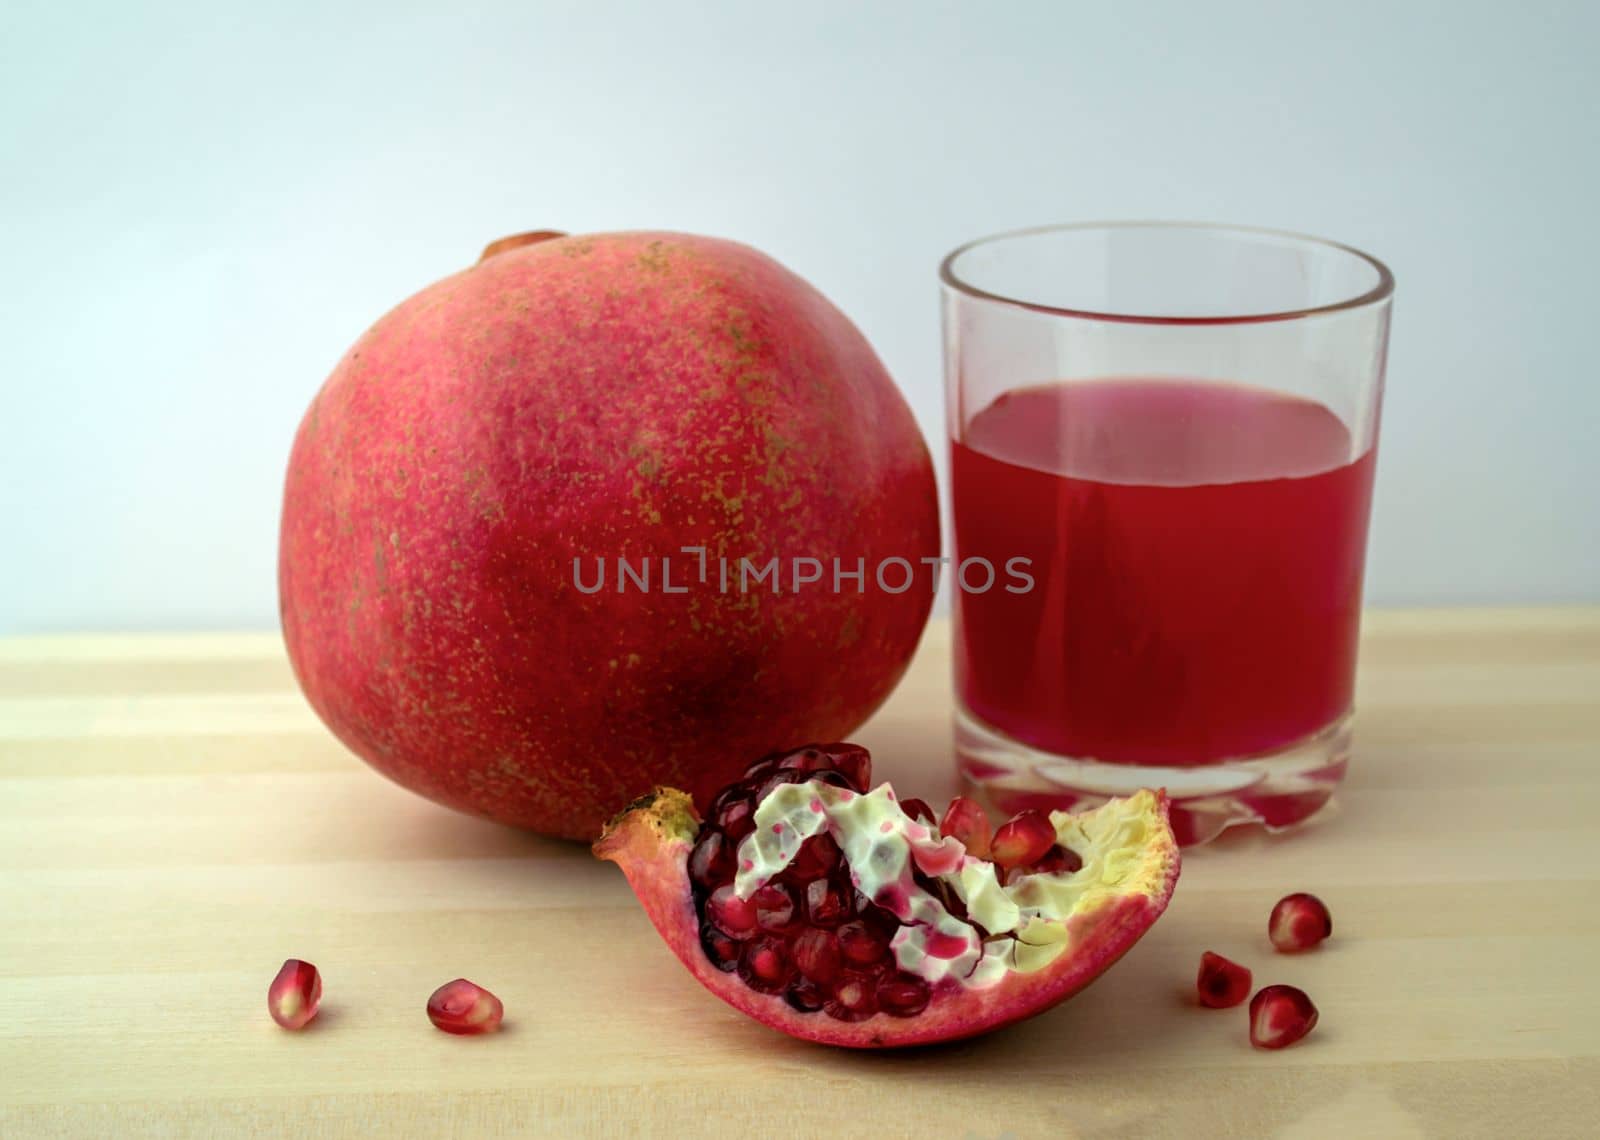 Pomegranate and pomegranate juice, photo. Photo of pomegranate and pomegranate juice in a glass on a wooden table.